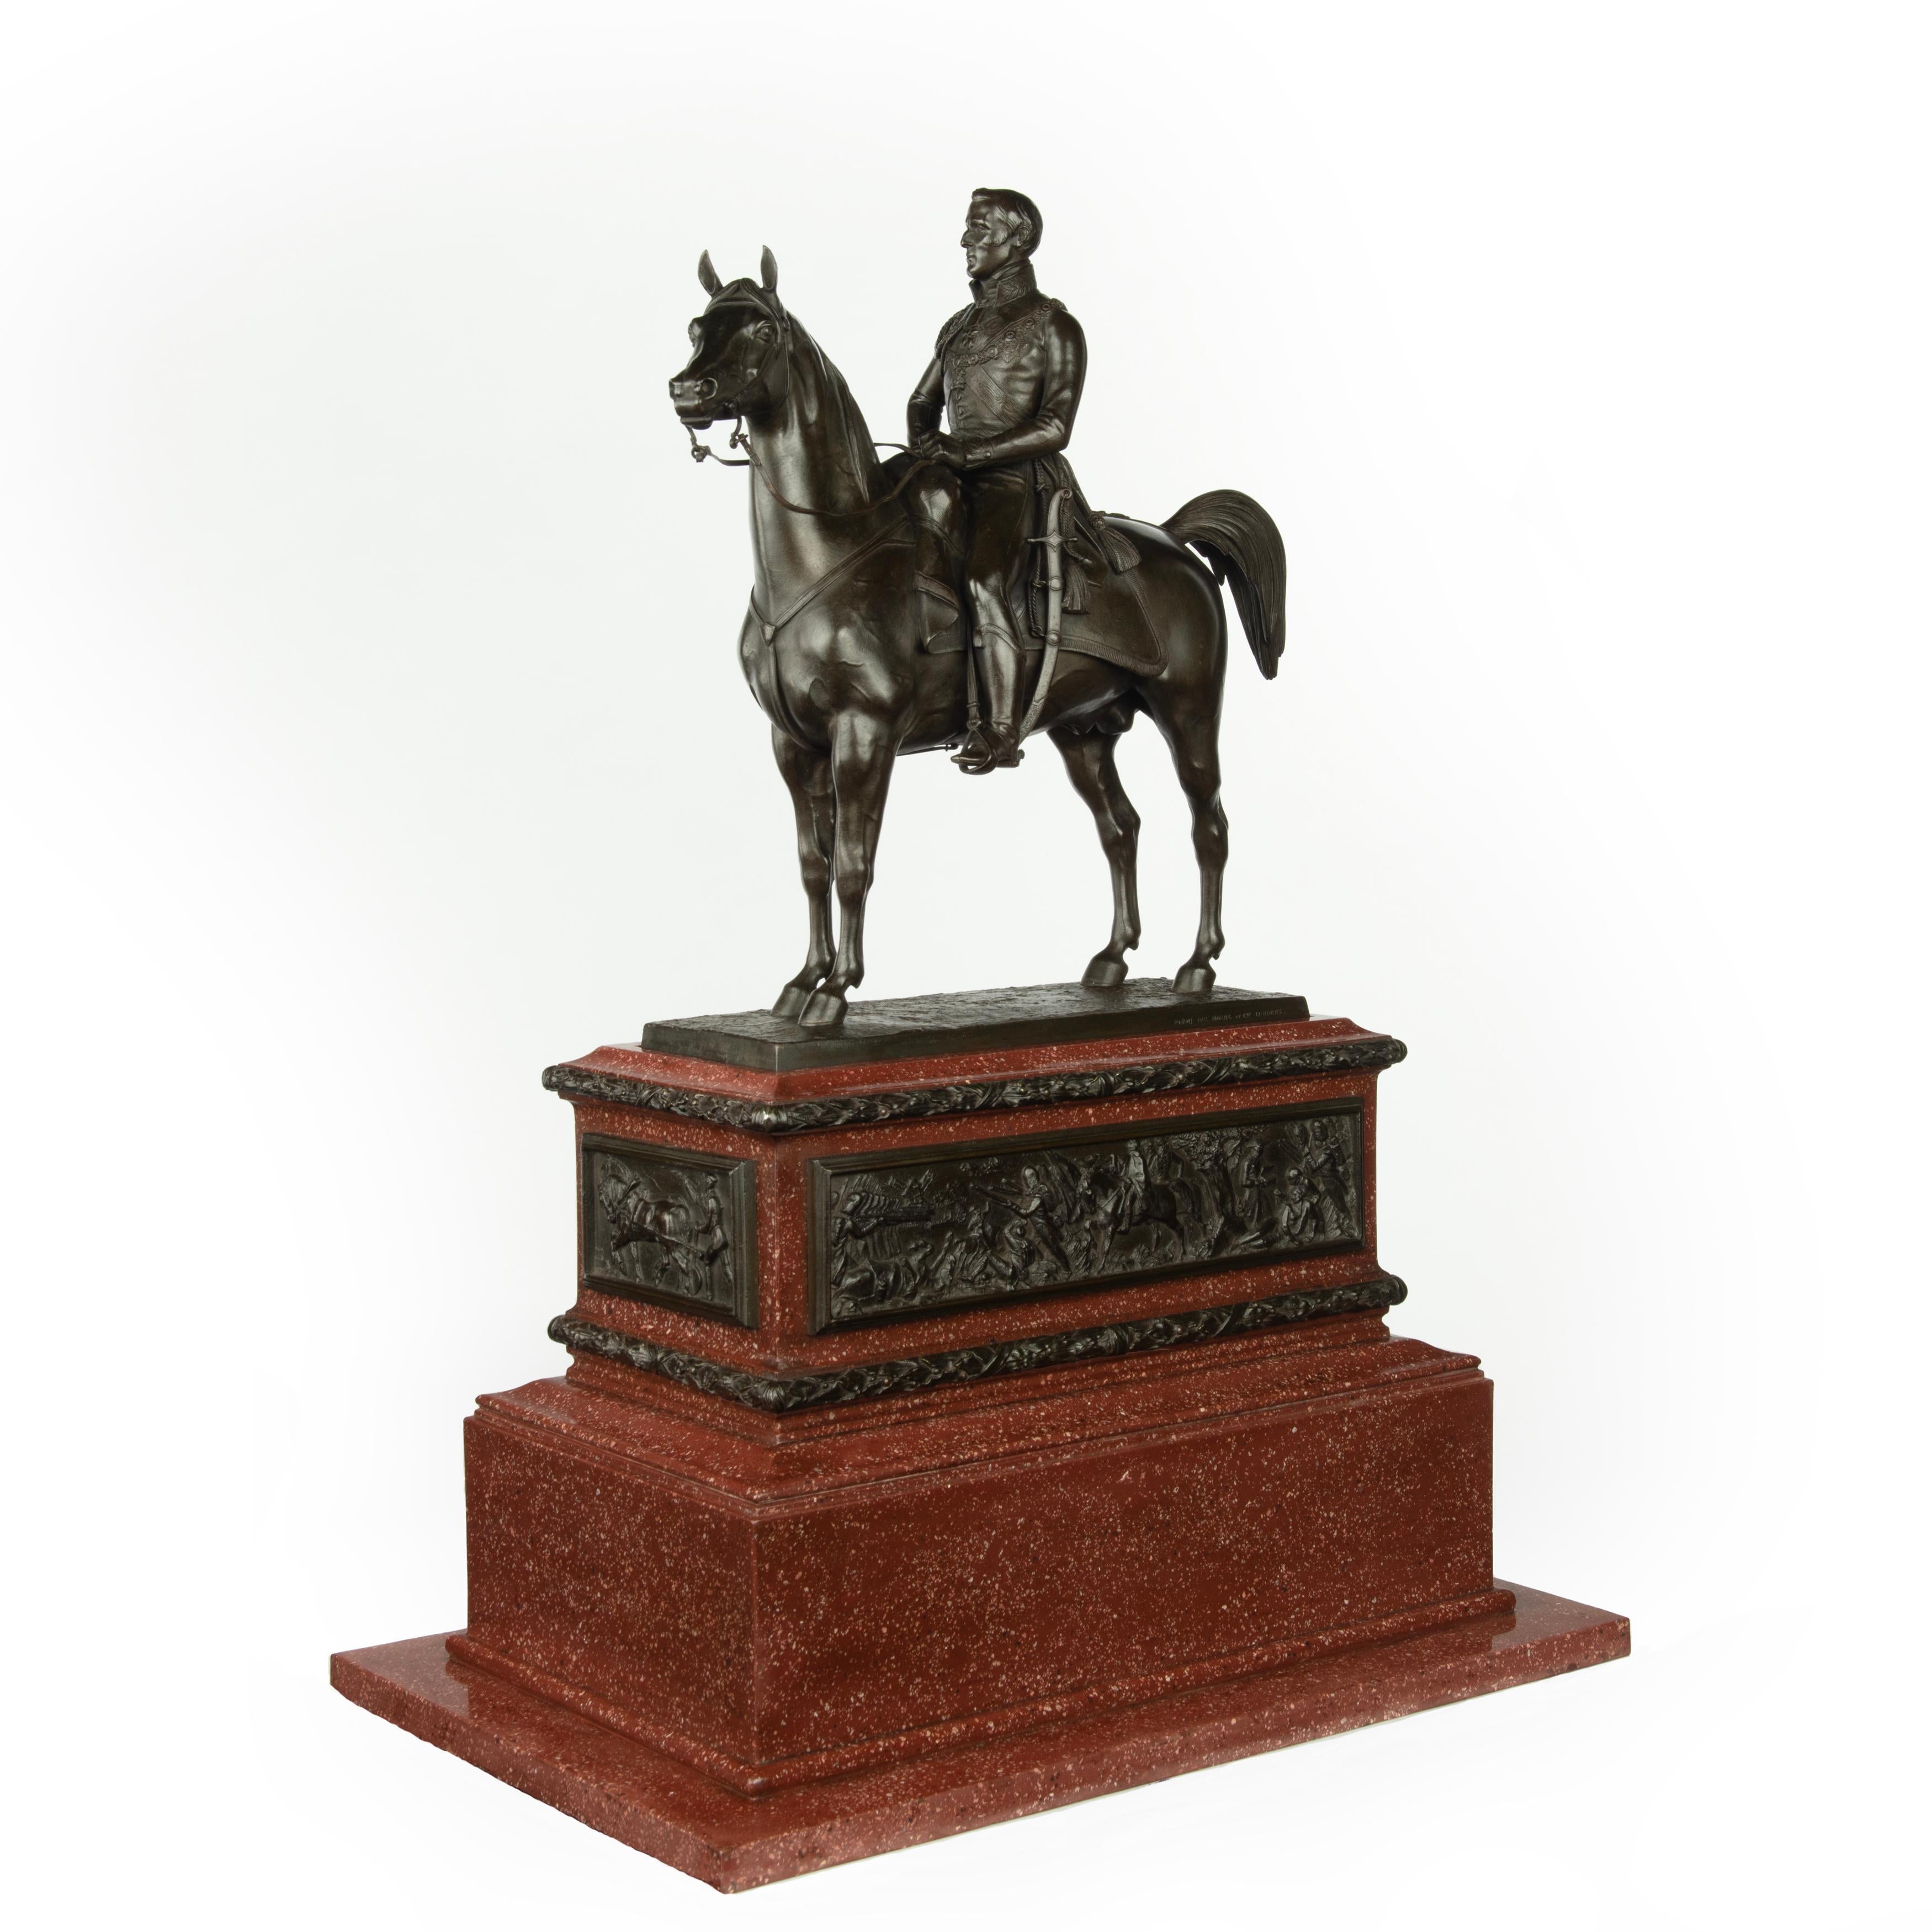 An equestrian statuette of the Duke of Wellington by Morel after Marochetti. This bronze shows Arthur Wellesley, 1st Duke of Wellington, astride his famous horse, Copenhagen.  He is in uniform and regalia including the Order of the Golden Fleece,